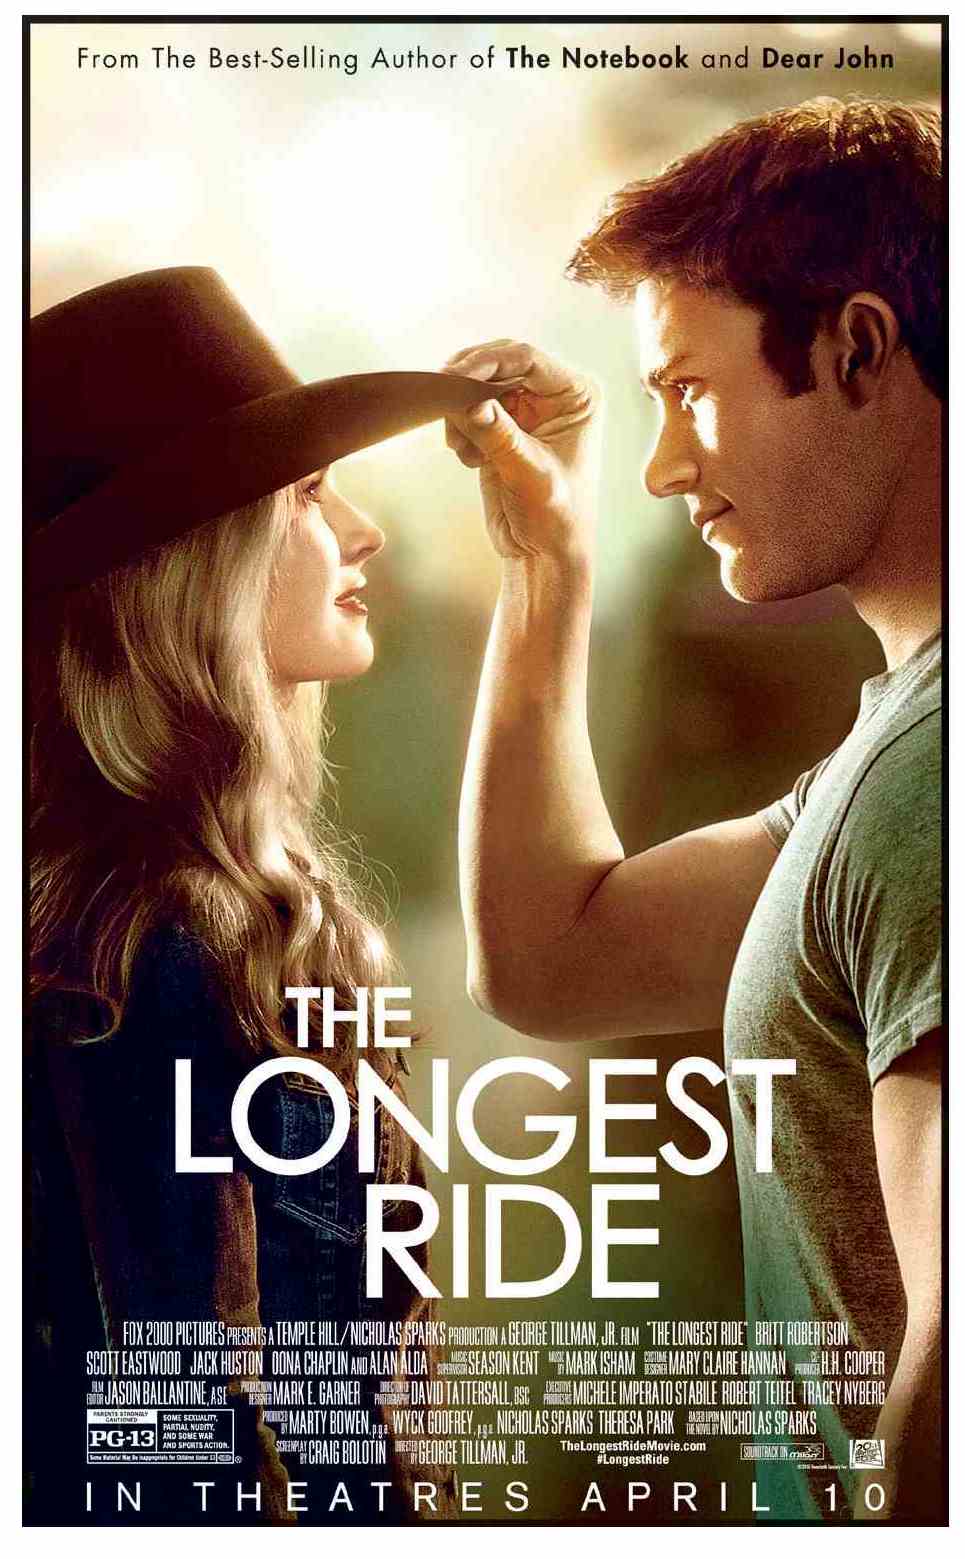 High Resolution Wallpaper | The Longest Ride 965x1559 px